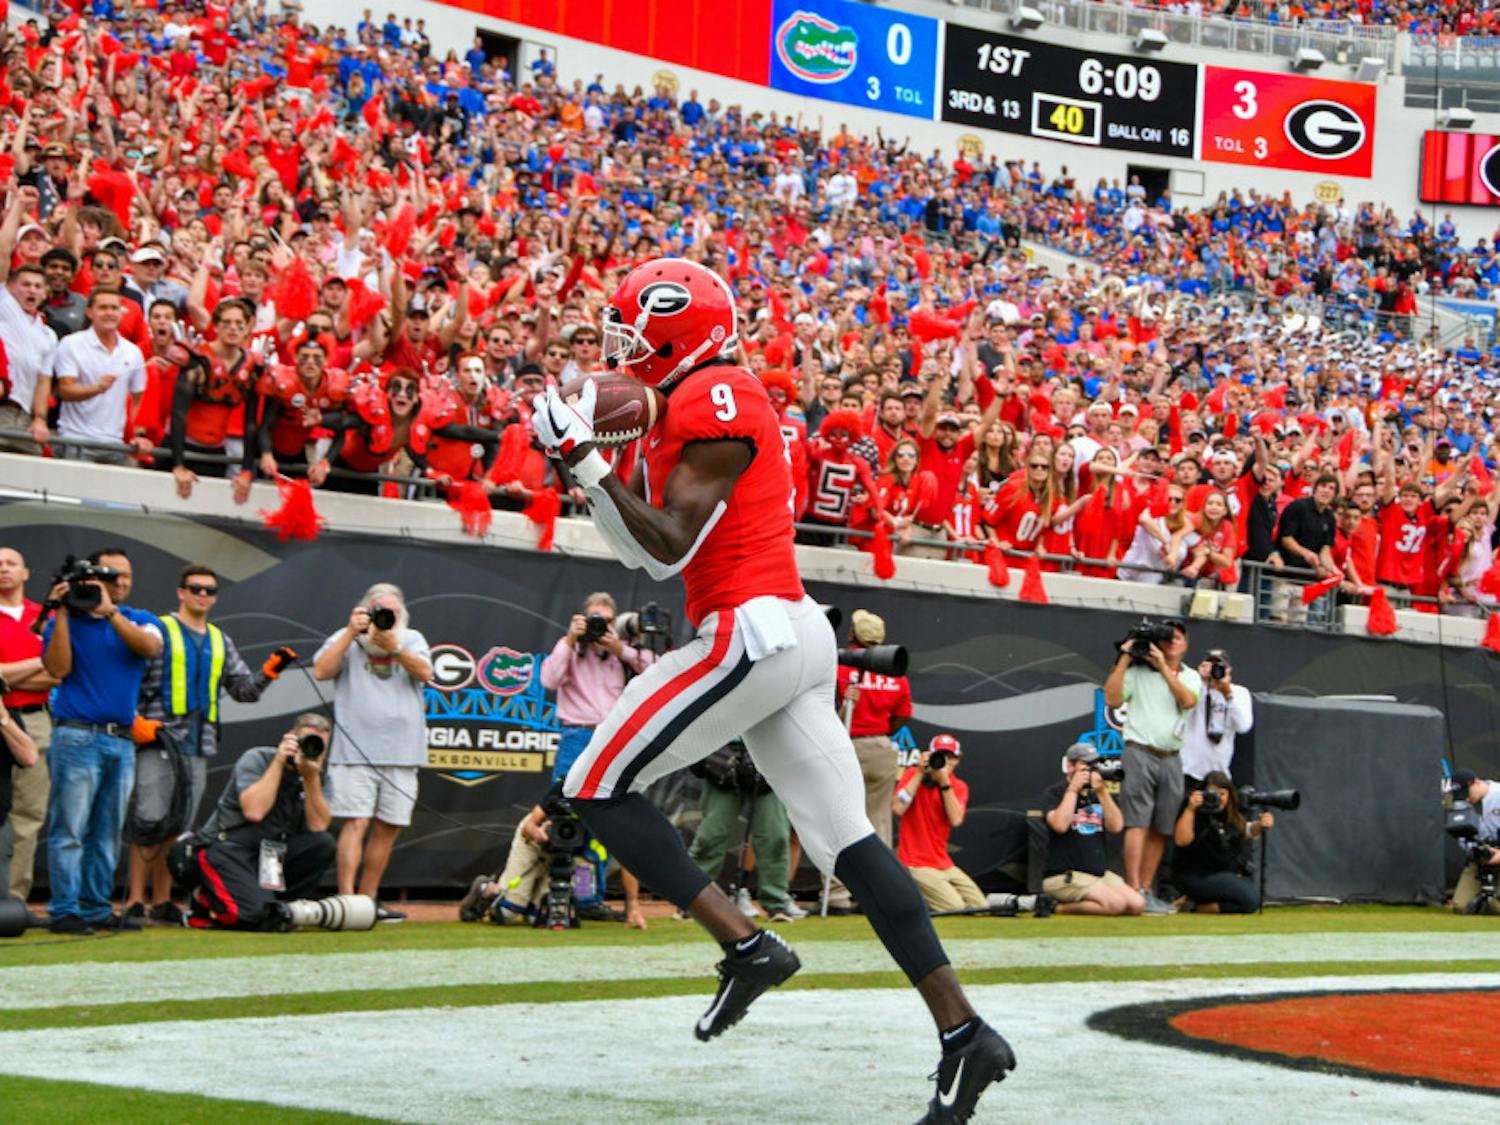 Georgia football enters the 2021 edition of Florida-Georgia as the No. 1 team in the country.